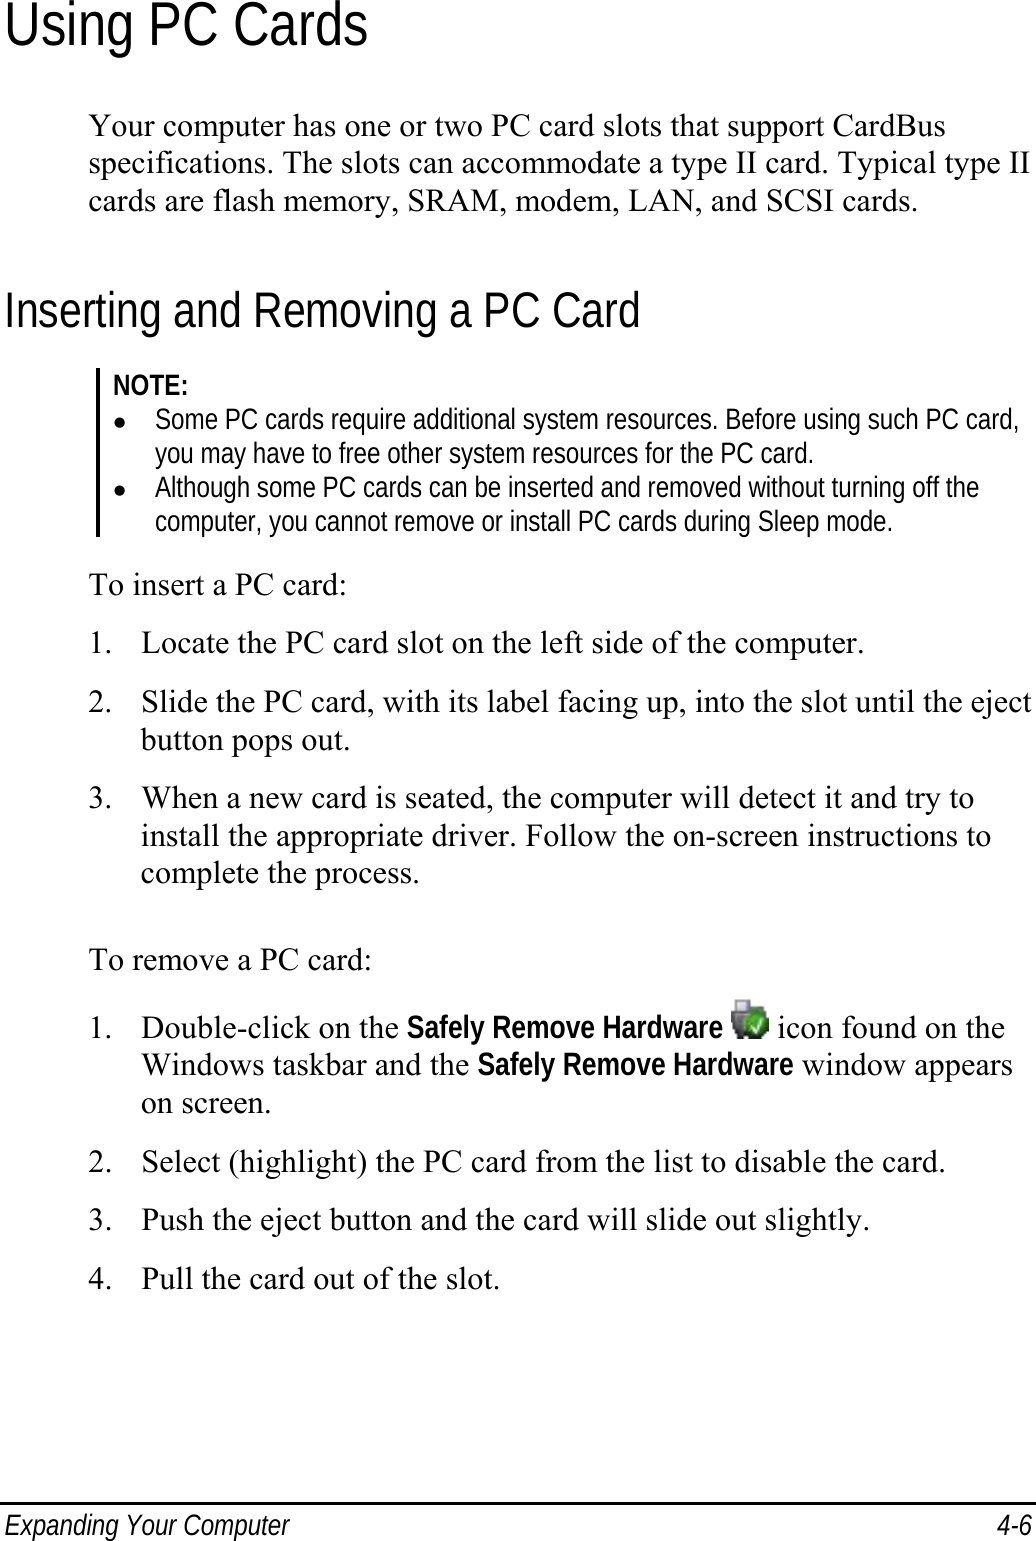  Expanding Your Computer  4-6 Using PC Cards Your computer has one or two PC card slots that support CardBus specifications. The slots can accommodate a type II card. Typical type II cards are flash memory, SRAM, modem, LAN, and SCSI cards. Inserting and Removing a PC Card NOTE: z Some PC cards require additional system resources. Before using such PC card, you may have to free other system resources for the PC card. z Although some PC cards can be inserted and removed without turning off the computer, you cannot remove or install PC cards during Sleep mode.  To insert a PC card: 1. Locate the PC card slot on the left side of the computer. 2. Slide the PC card, with its label facing up, into the slot until the eject button pops out. 3. When a new card is seated, the computer will detect it and try to install the appropriate driver. Follow the on-screen instructions to complete the process.  To remove a PC card: 1. Double-click on the Safely Remove Hardware  icon found on the Windows taskbar and the Safely Remove Hardware window appears on screen. 2. Select (highlight) the PC card from the list to disable the card. 3. Push the eject button and the card will slide out slightly. 4. Pull the card out of the slot.  